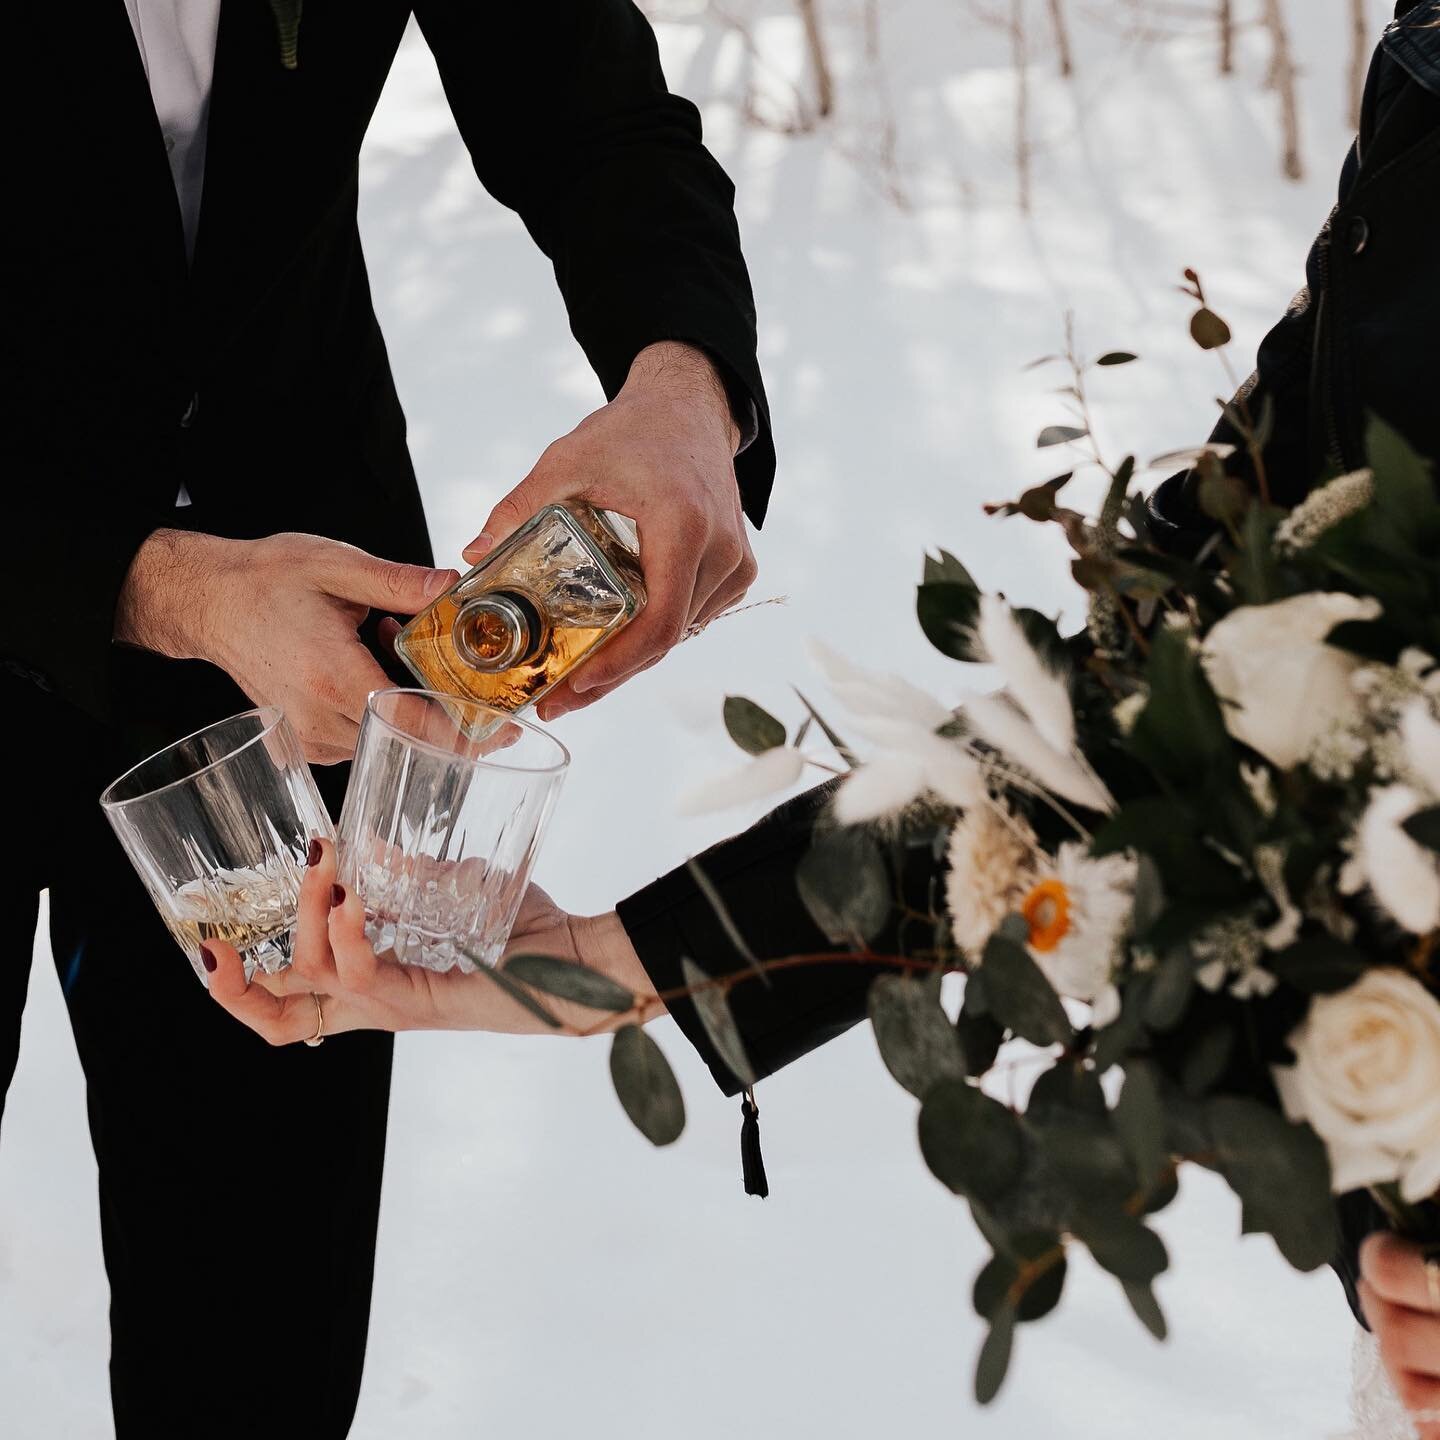 I&rsquo;ll bring the flowers, you bring the whiskey &hellip;

lets get married 
.
.
.
.
#elopementlove #loveelope #elopementbride #elopement #elopementcollective #twosecretvows #secretvows #mountainelopement #winterelopement #coloradoelopement #breck